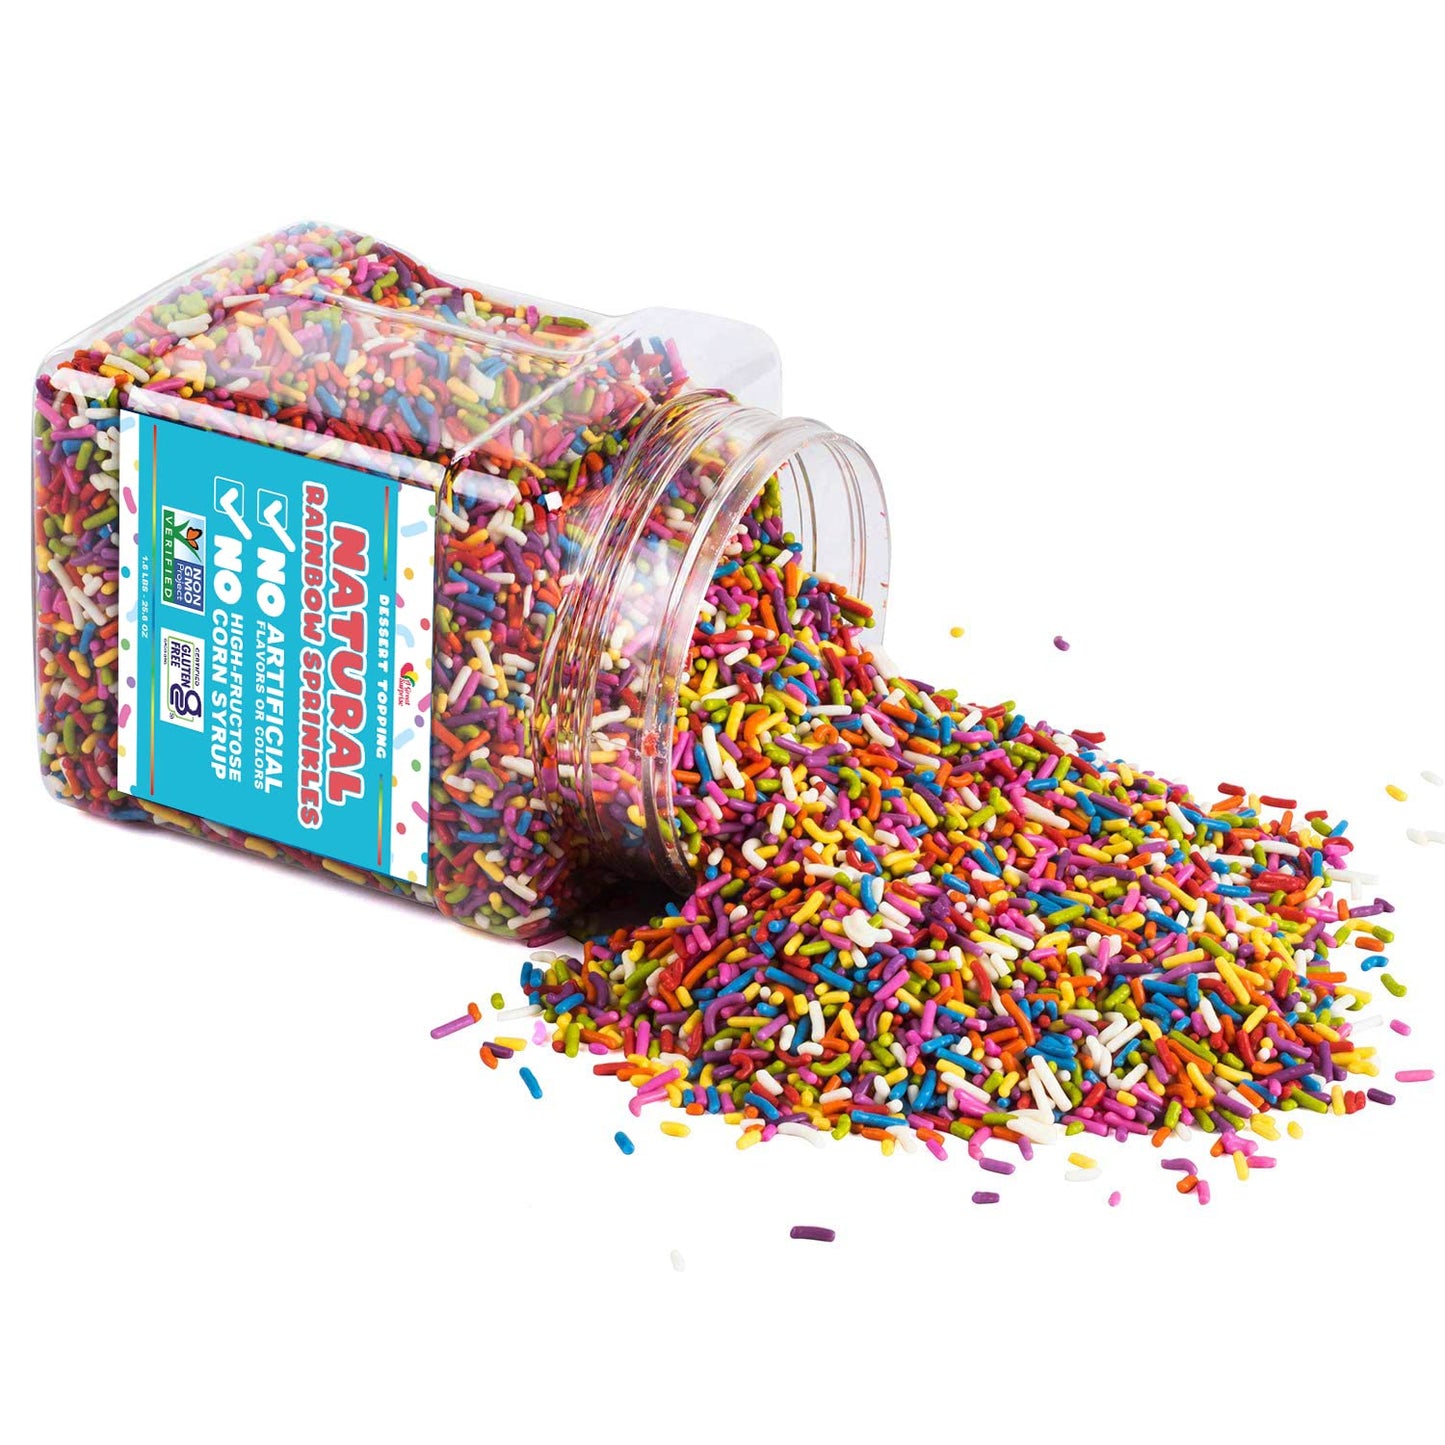 All NATURAL Sprinkles Rainbow - Rainbow Sprinkles with NO ARTIFICIAL COLORS, VEGAN, SOY FREE, EGG FREE - Carnival Sprinkles in Resealable Container, 1.6 LB Bulk Candy